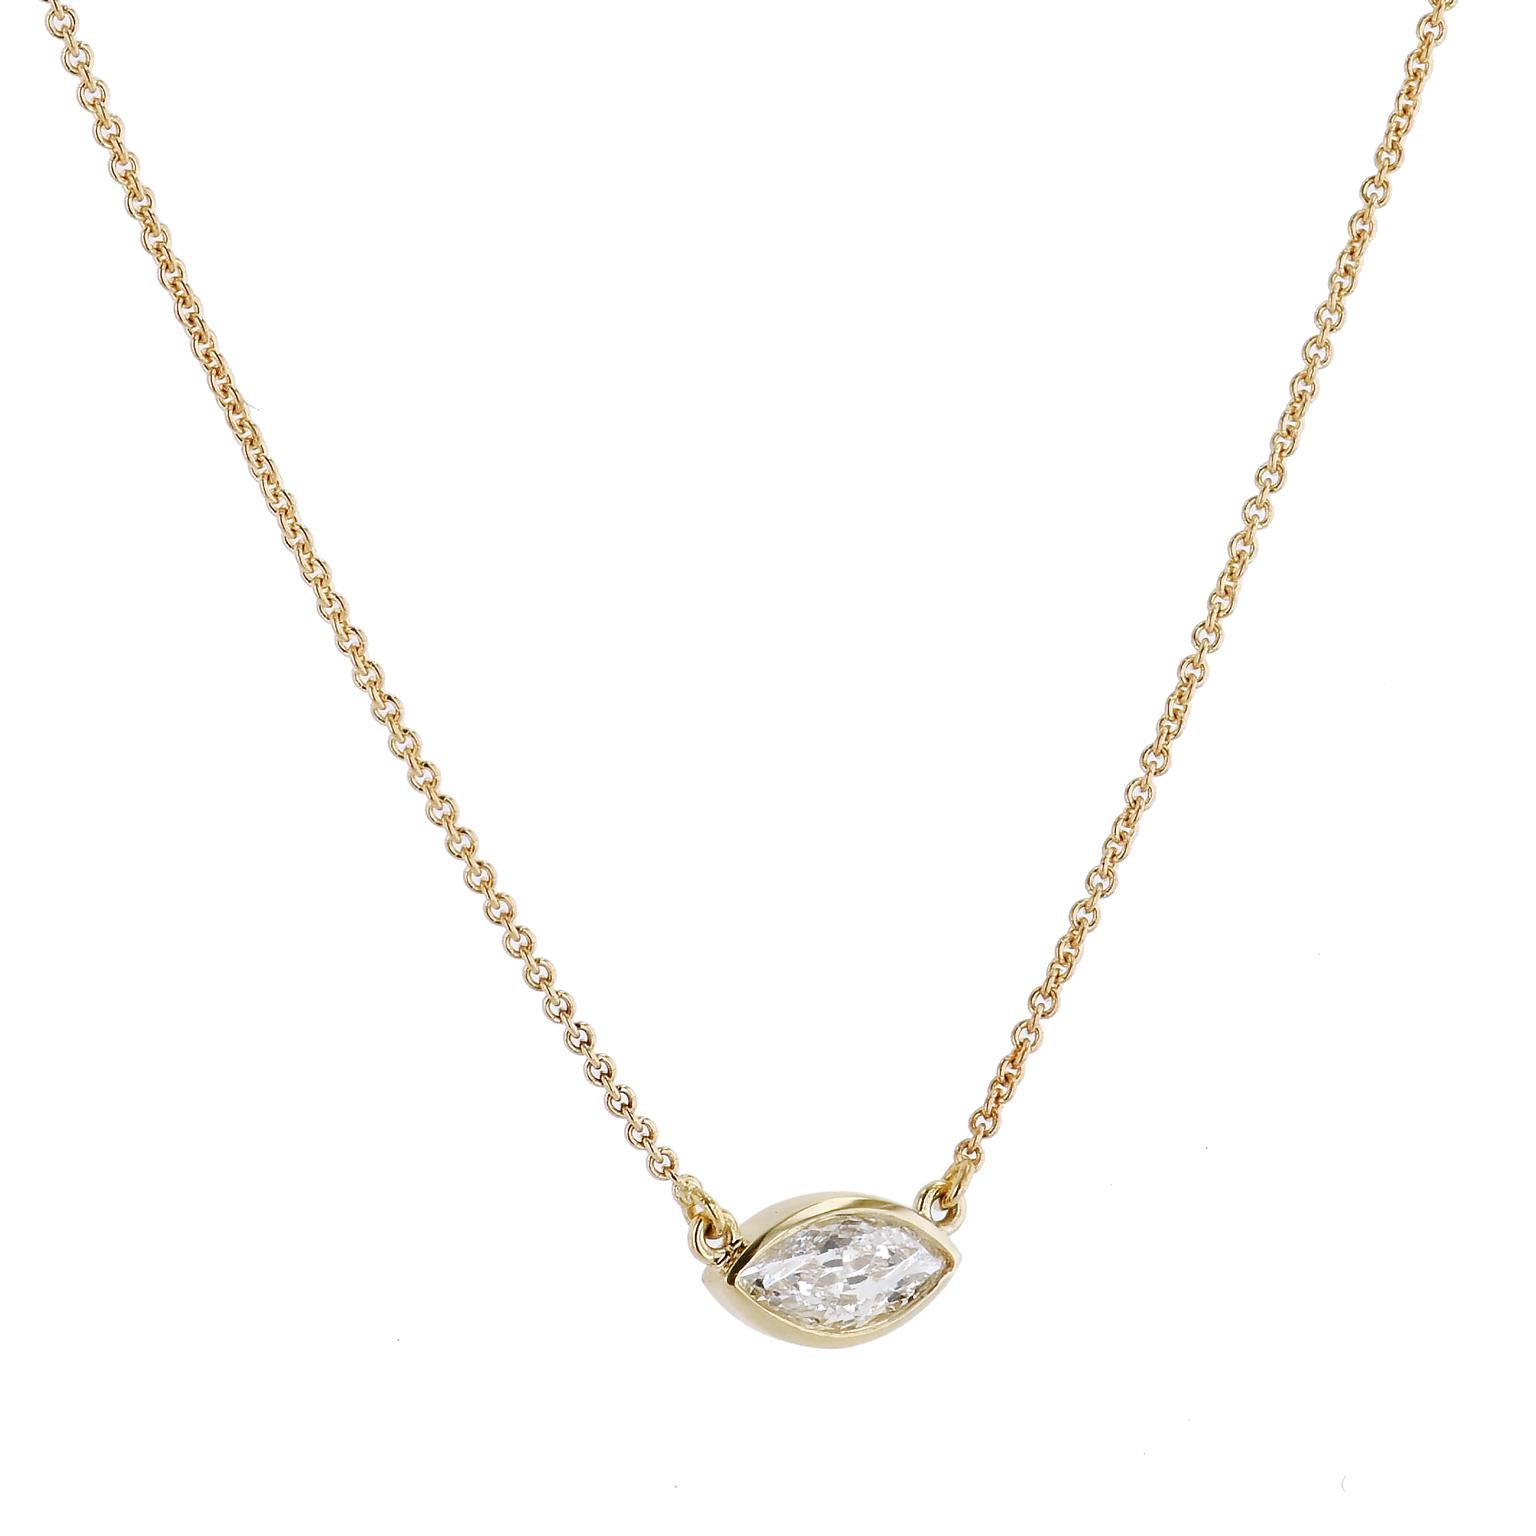 Small accessories still make a big statement. Make yours with this 18 karat yellow gold pendant holding a 0.25 carat marquis cut bezel set diamond(F-S12).